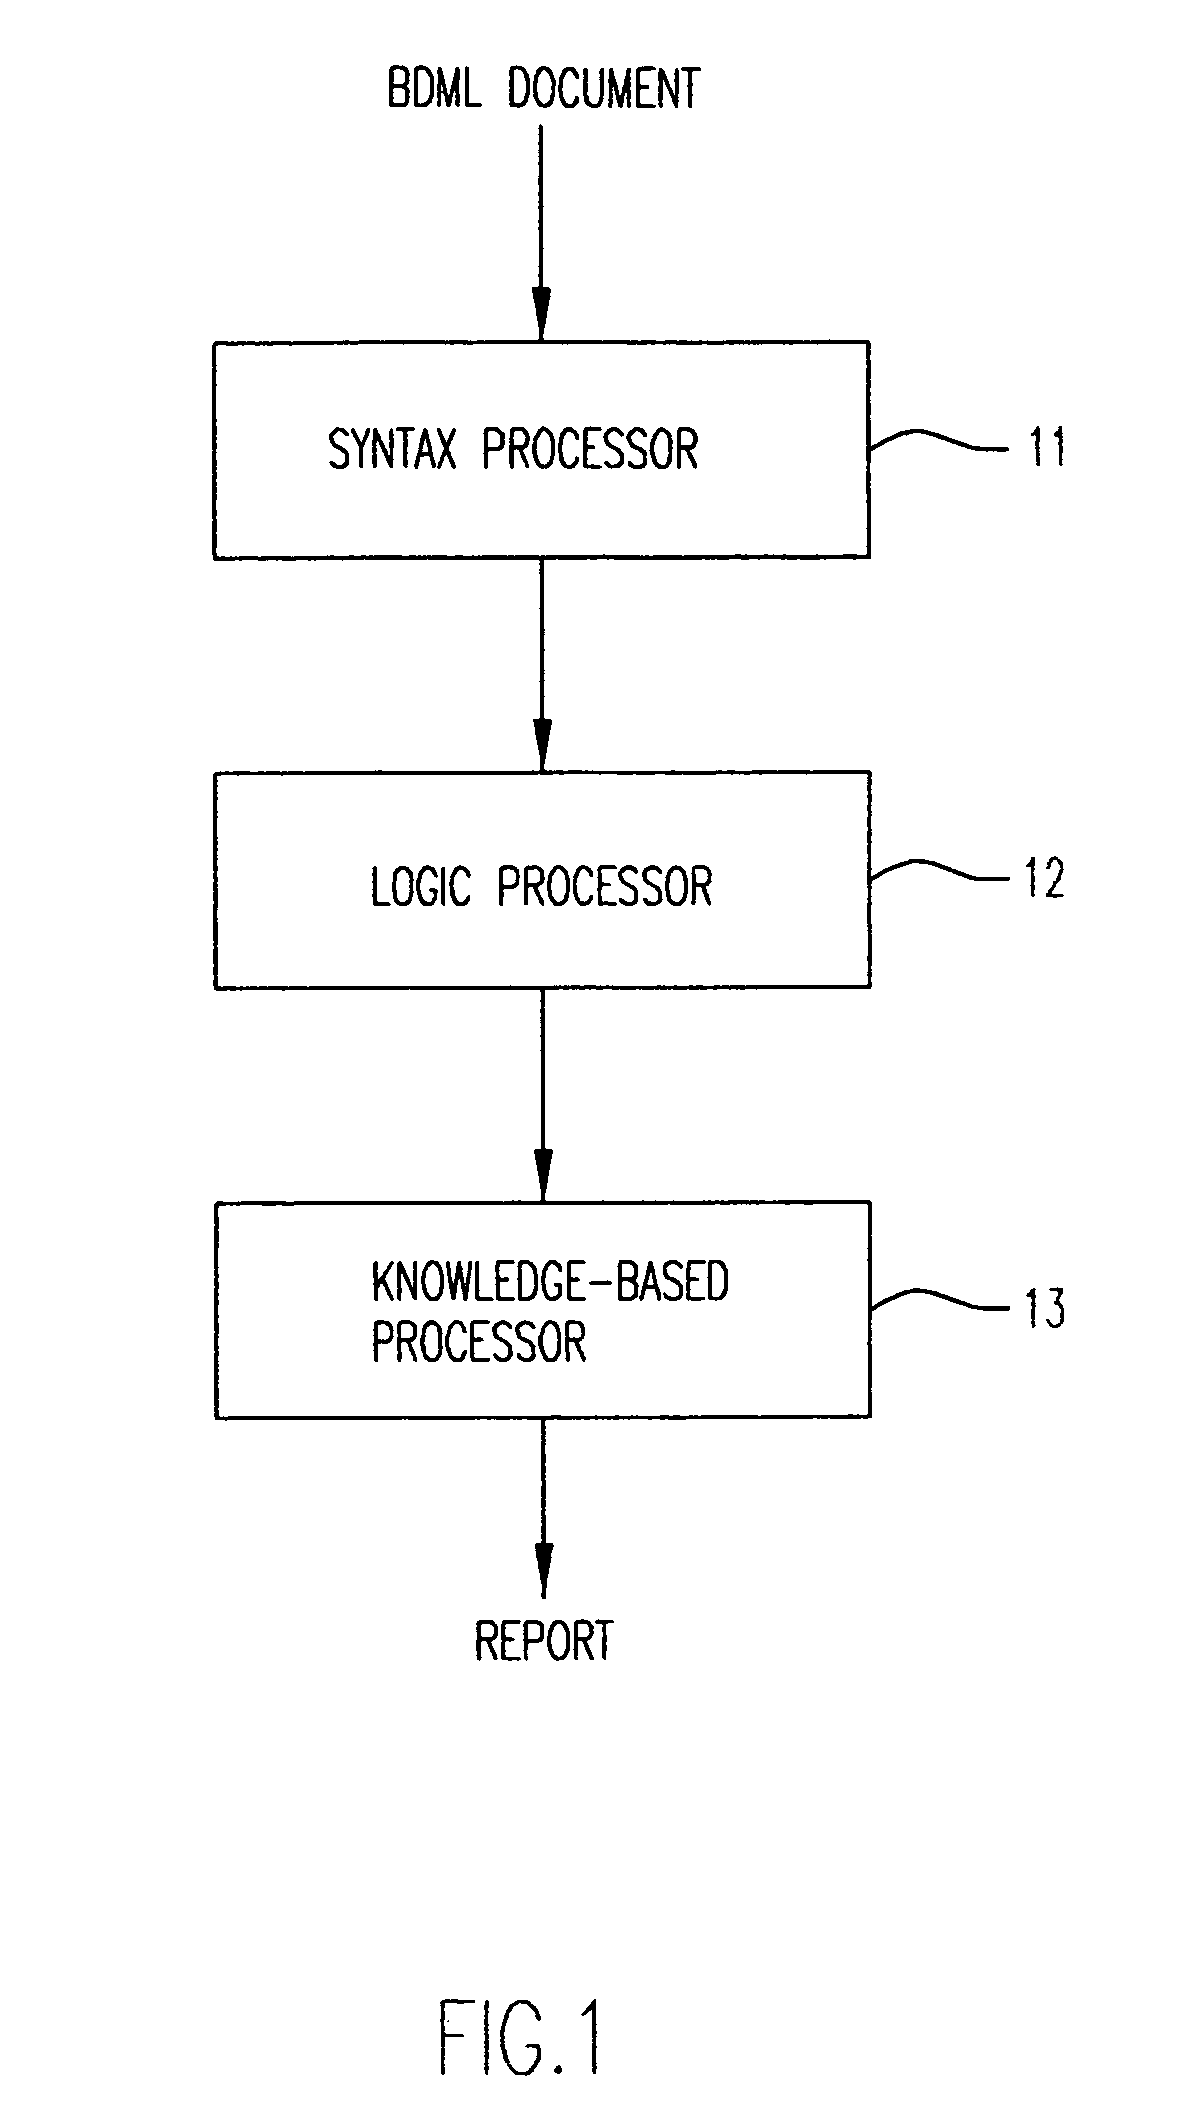 Method and framework for model specification, consistency checking and coordination of business processes